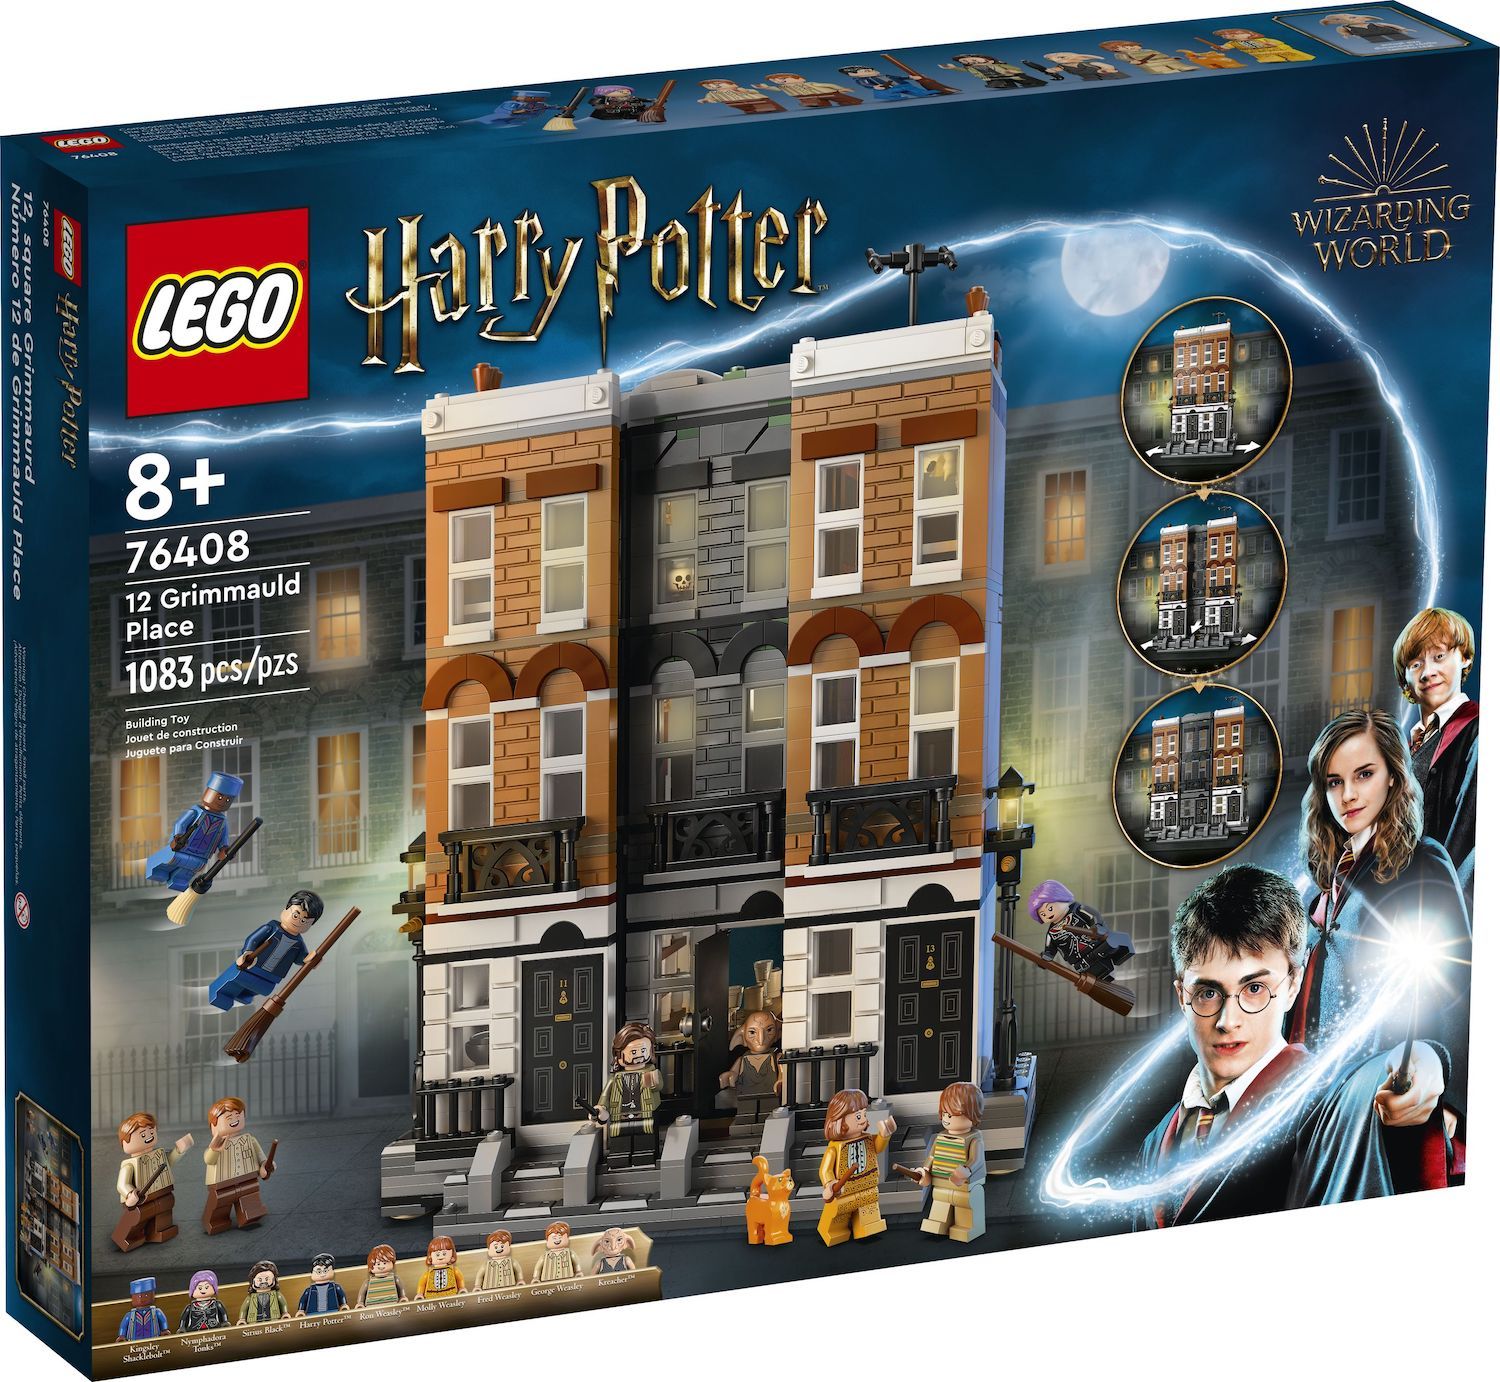 LEGO Harry Potter Summer 2022 Sets Now Available on LEGO Shop - The Fan